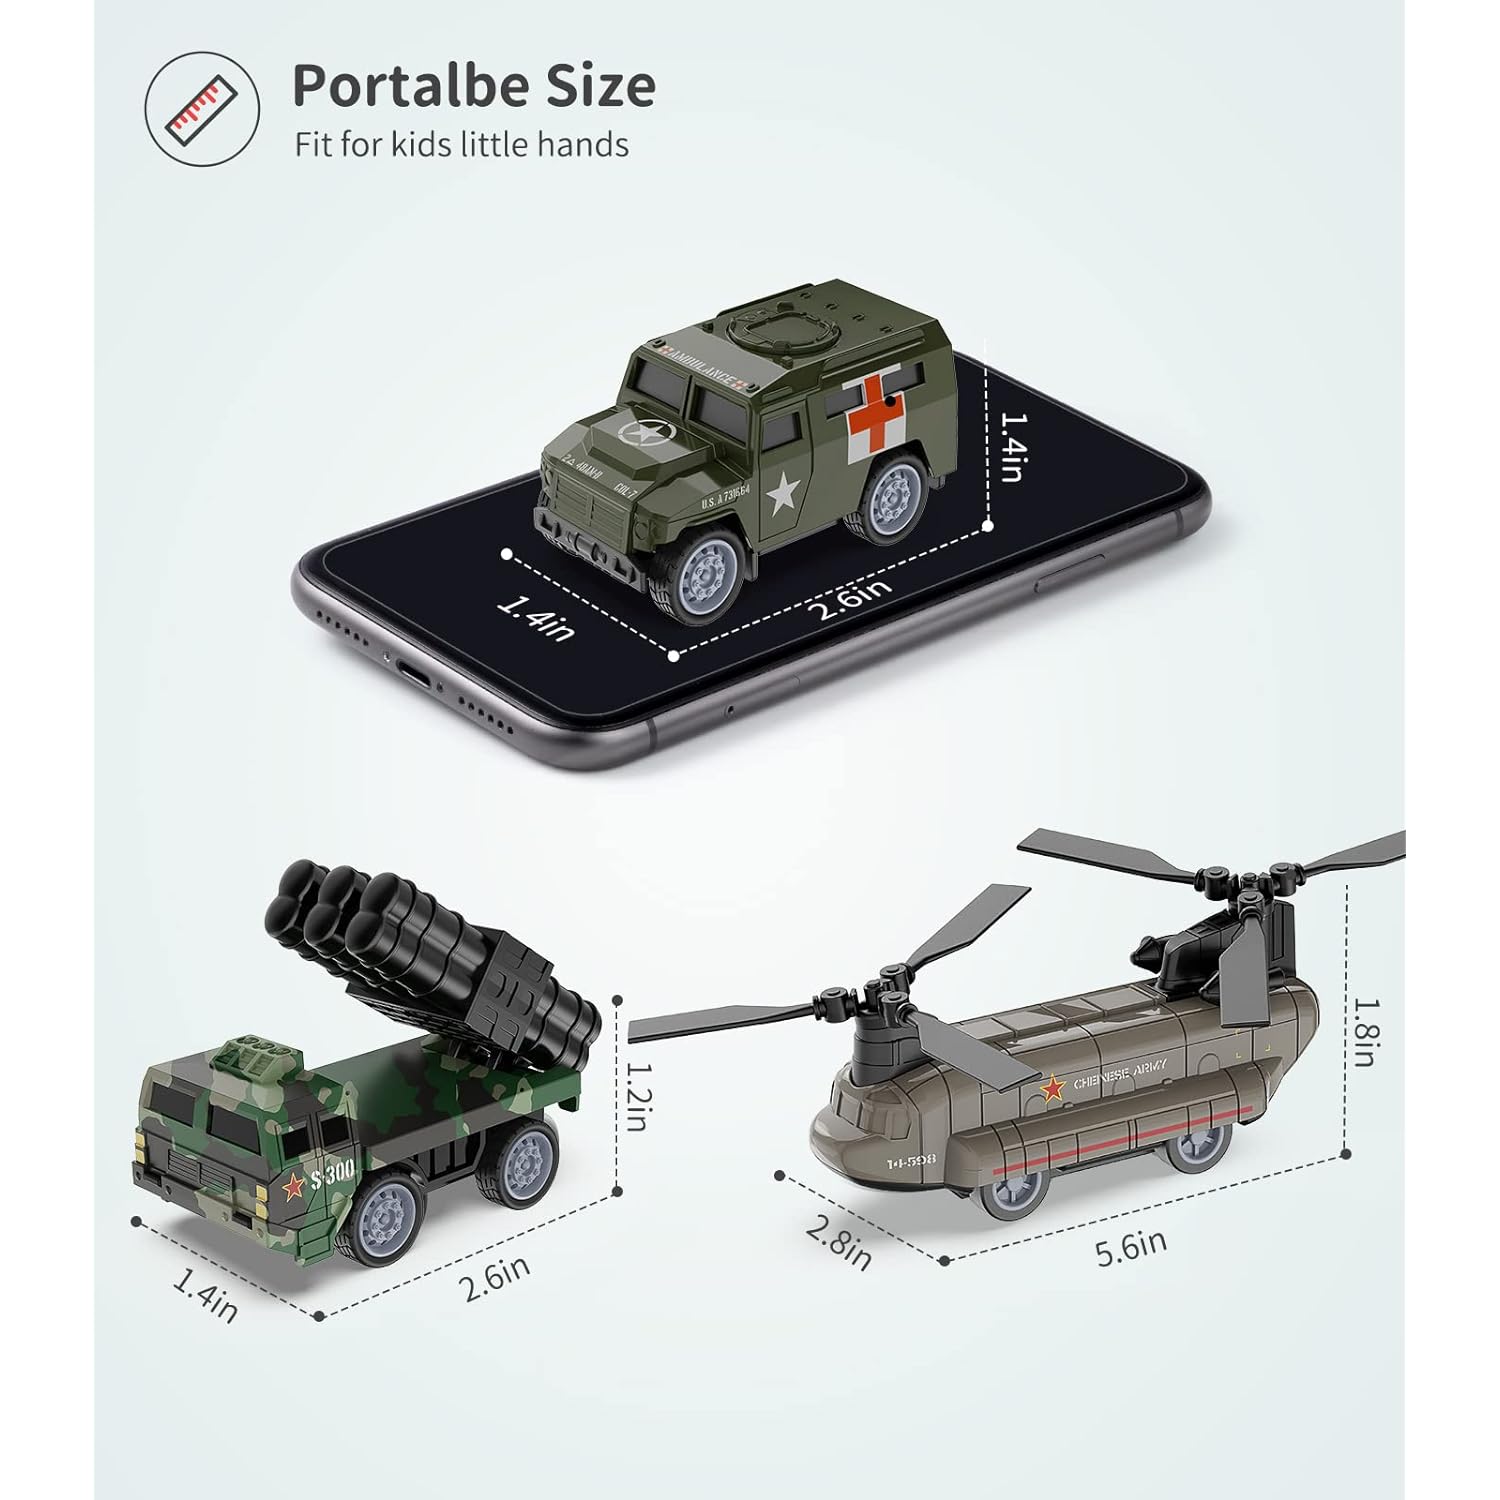 thinkstar Small Army Toy Cars, Die Cast Military Truck Vehicles Toys For Kids, Army Helicopter, Tanks, Mini Battle Car Play Set As C…